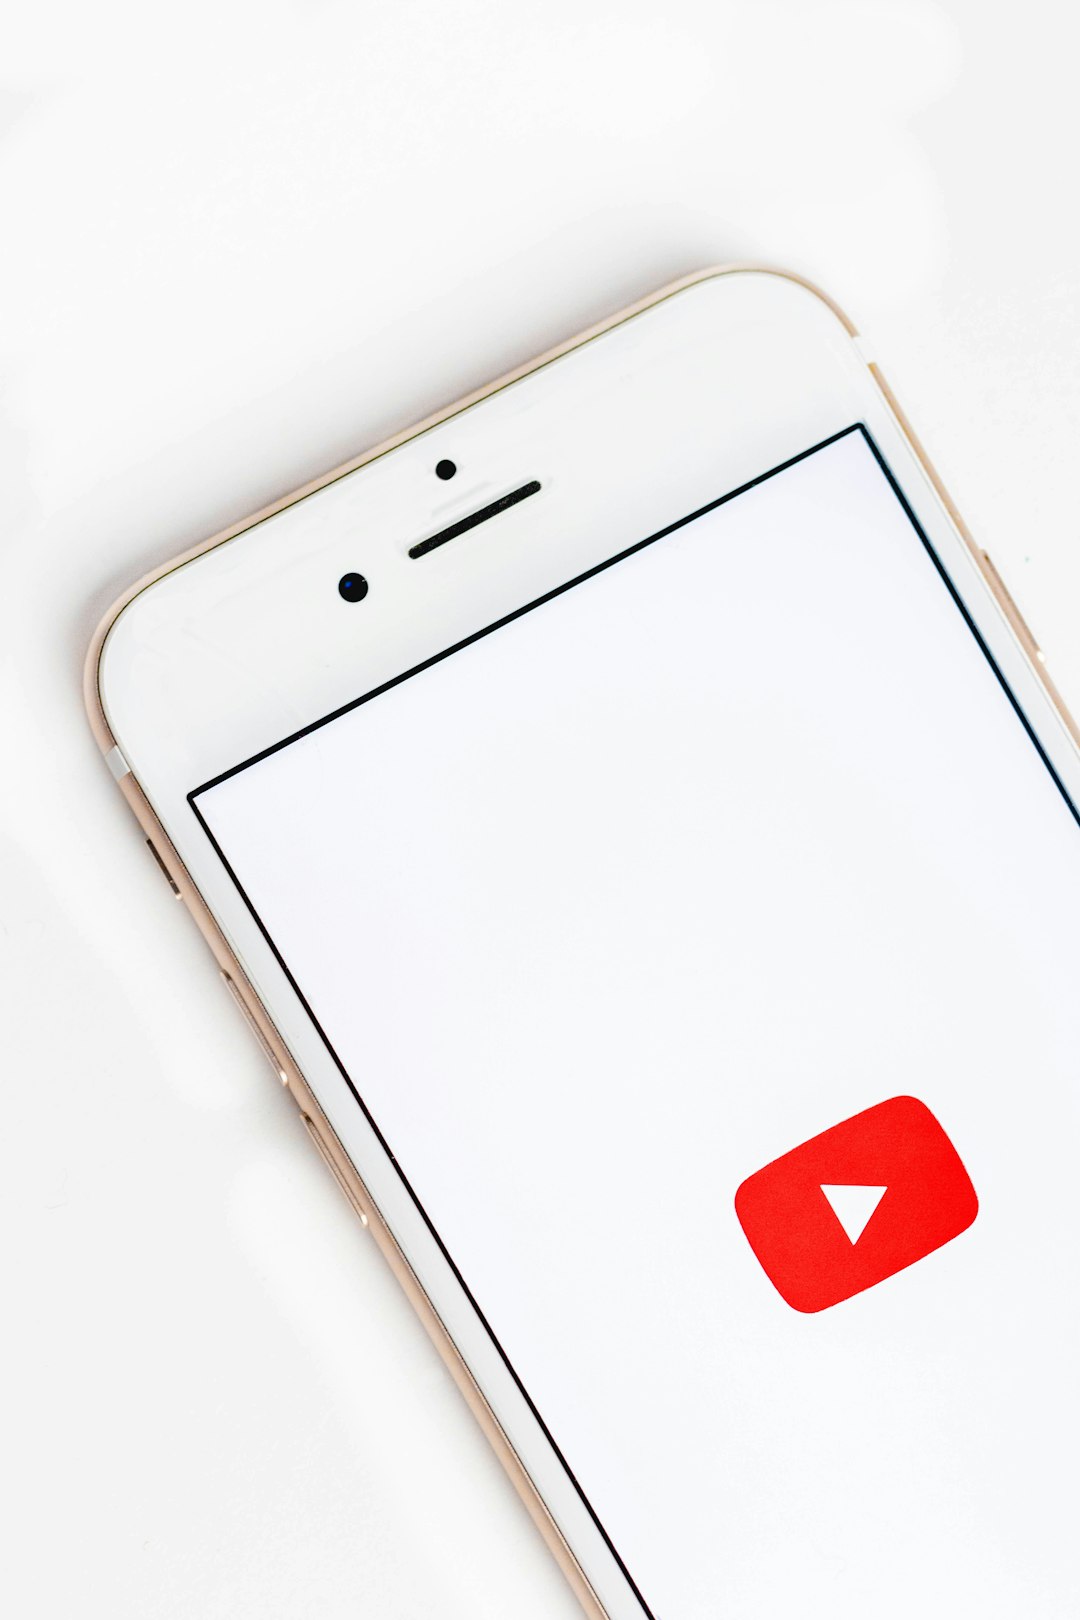 Everything You Need to Know About Youtube Ads - WFXG